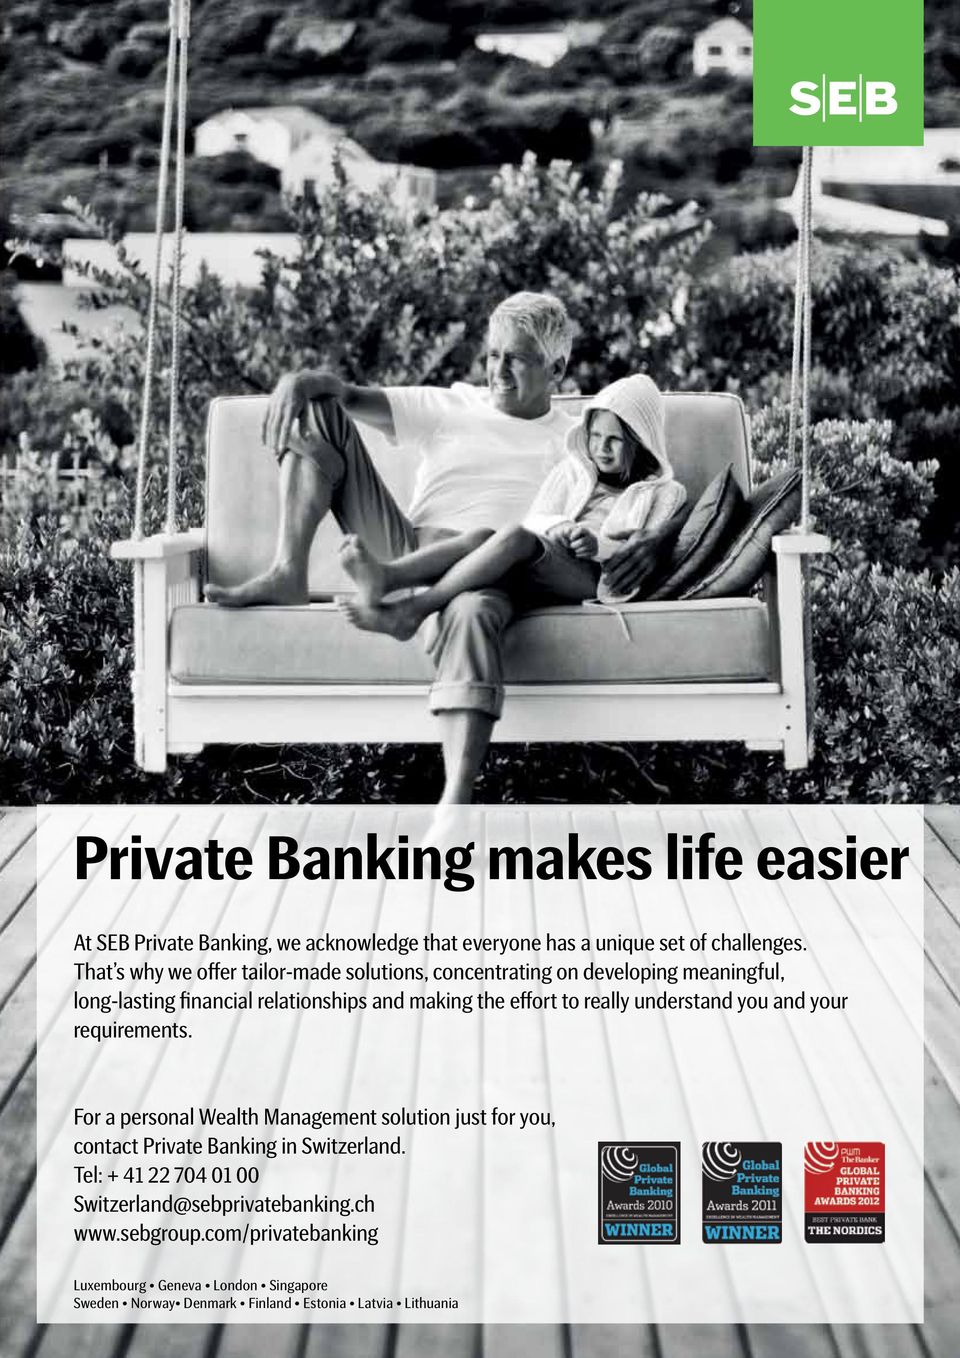 really understand you and your requirements. For a personal Wealth Management solution just for you, contact Private Banking in Switzerland.